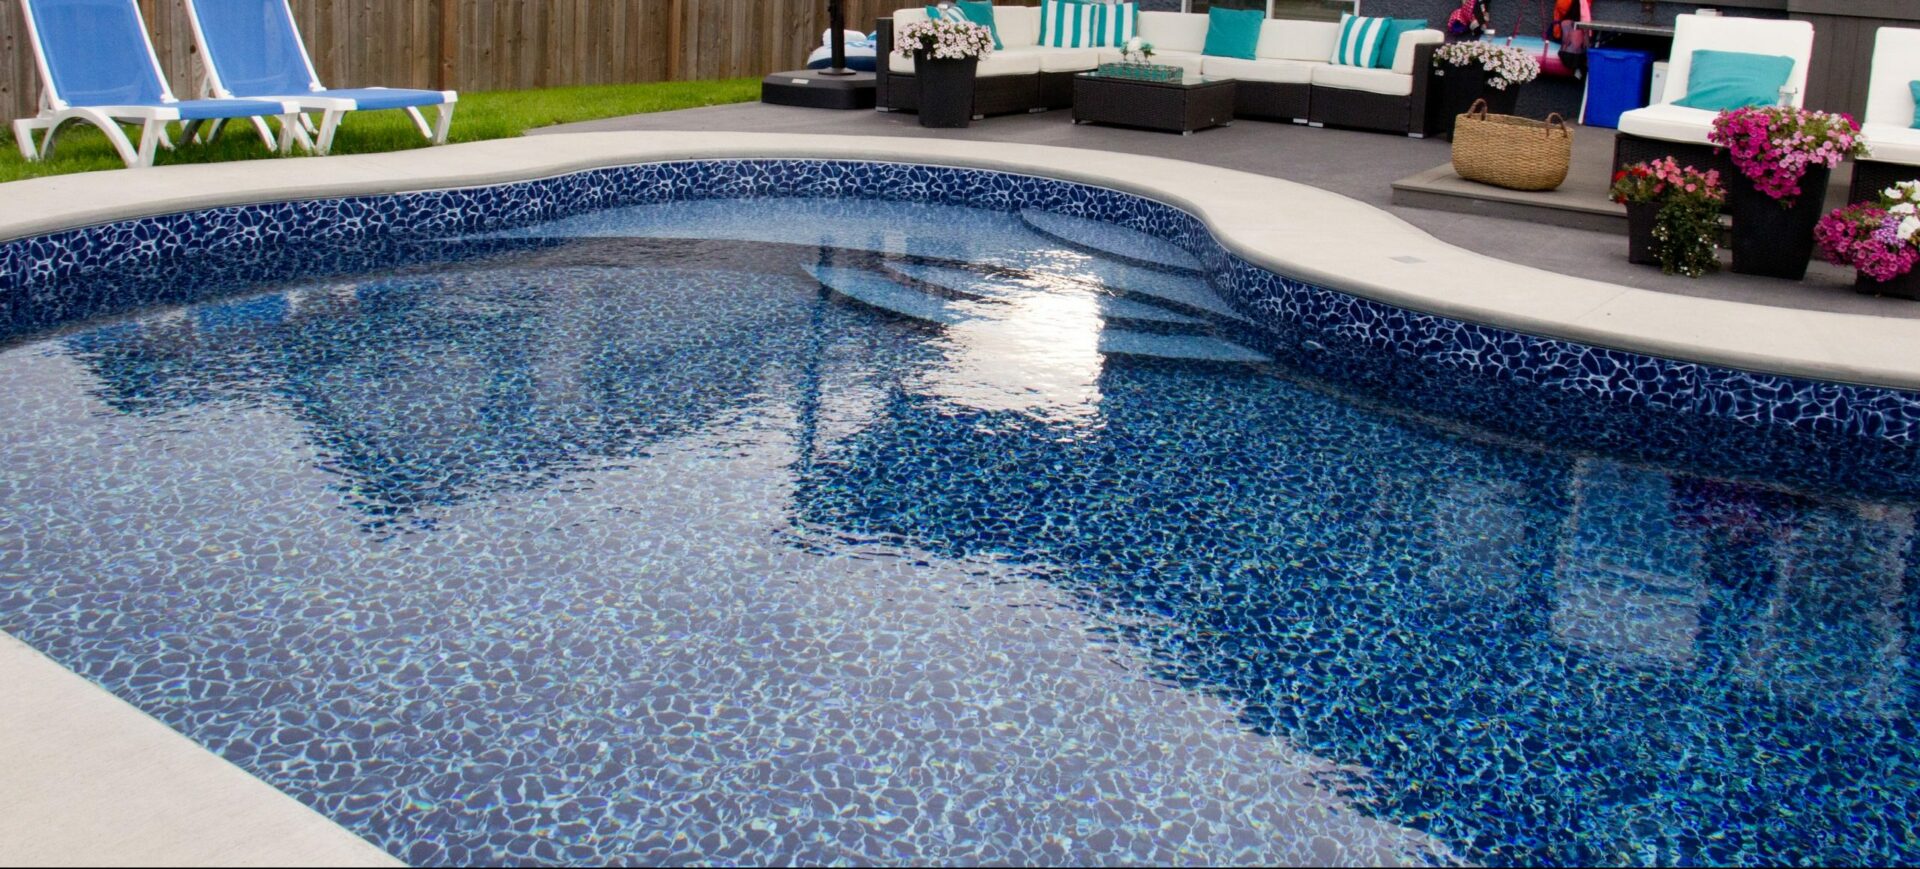 5 Must-Have Features for Your Custom Inground Pool